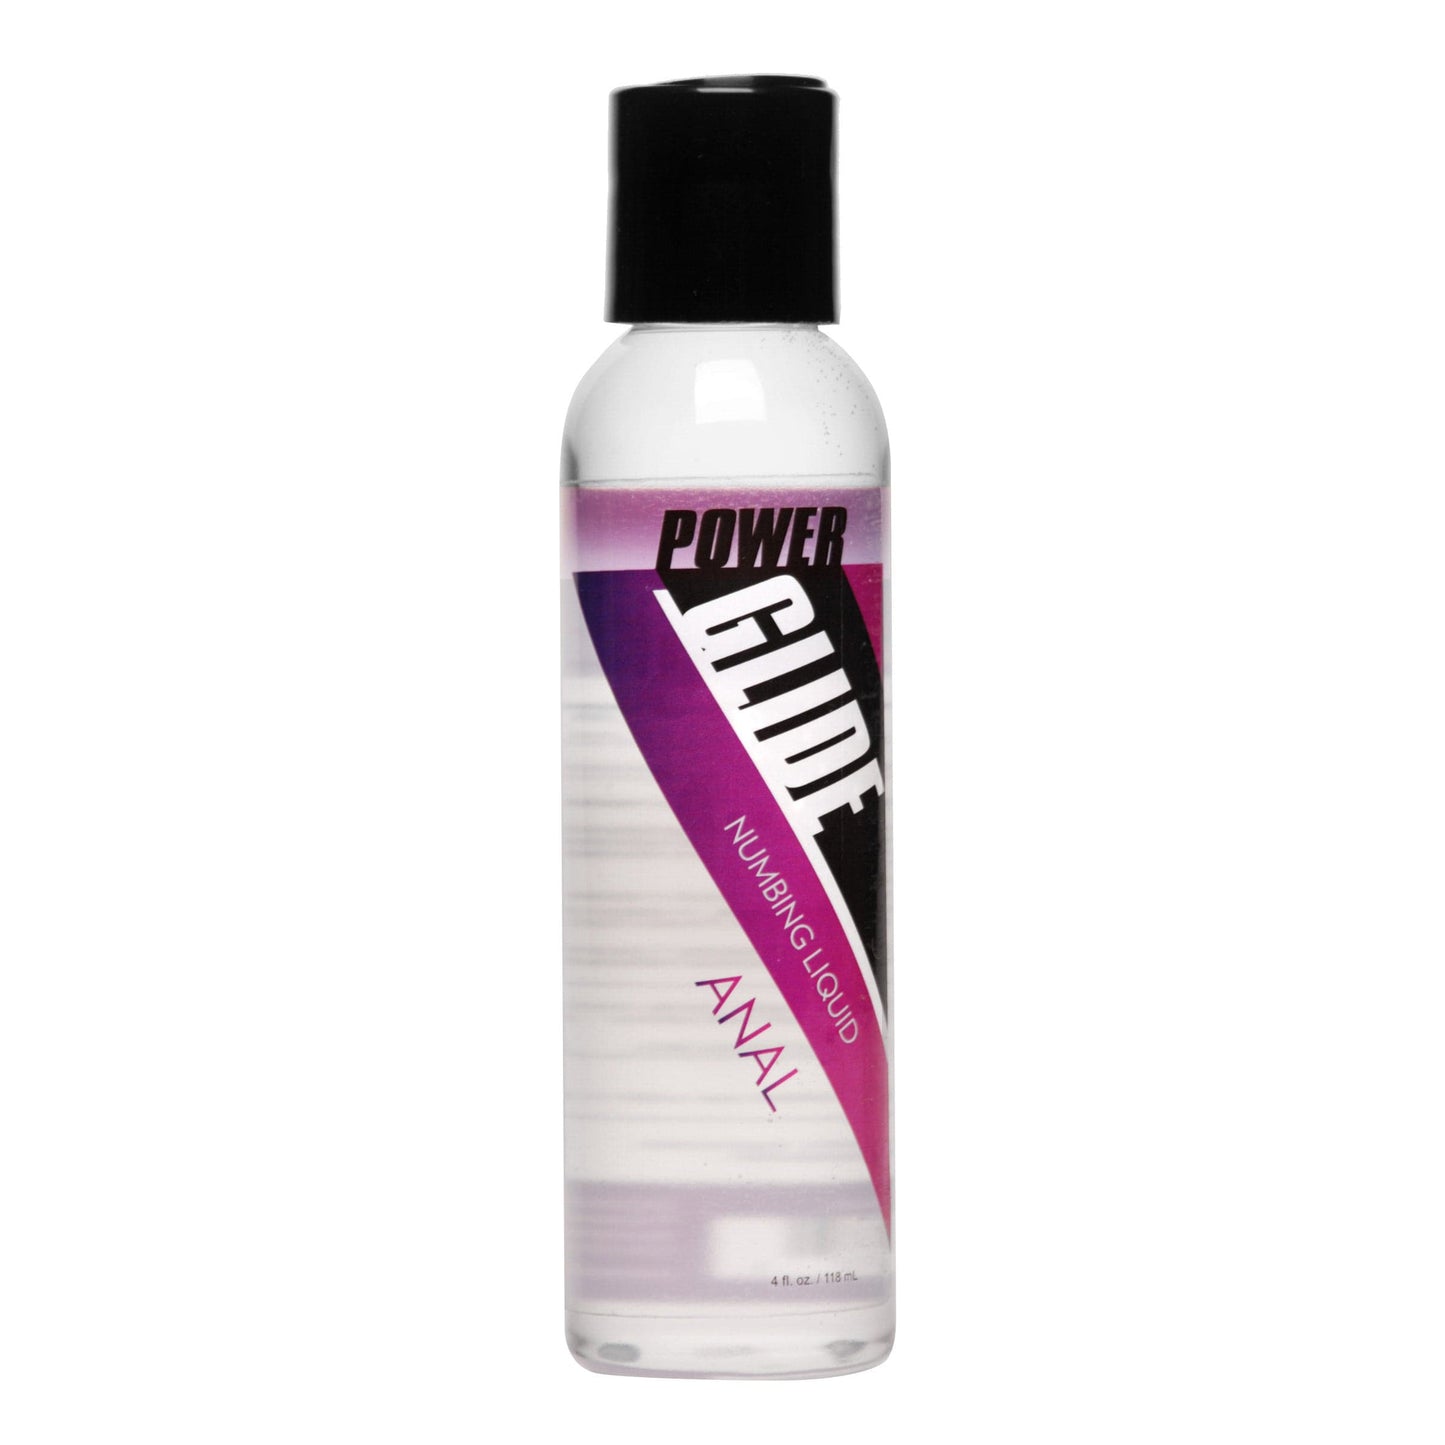 Power Glide Silicone Lubricant Power Glide Anal Numbing Personal Lubricant- 4 Oz at the Haus of Shag